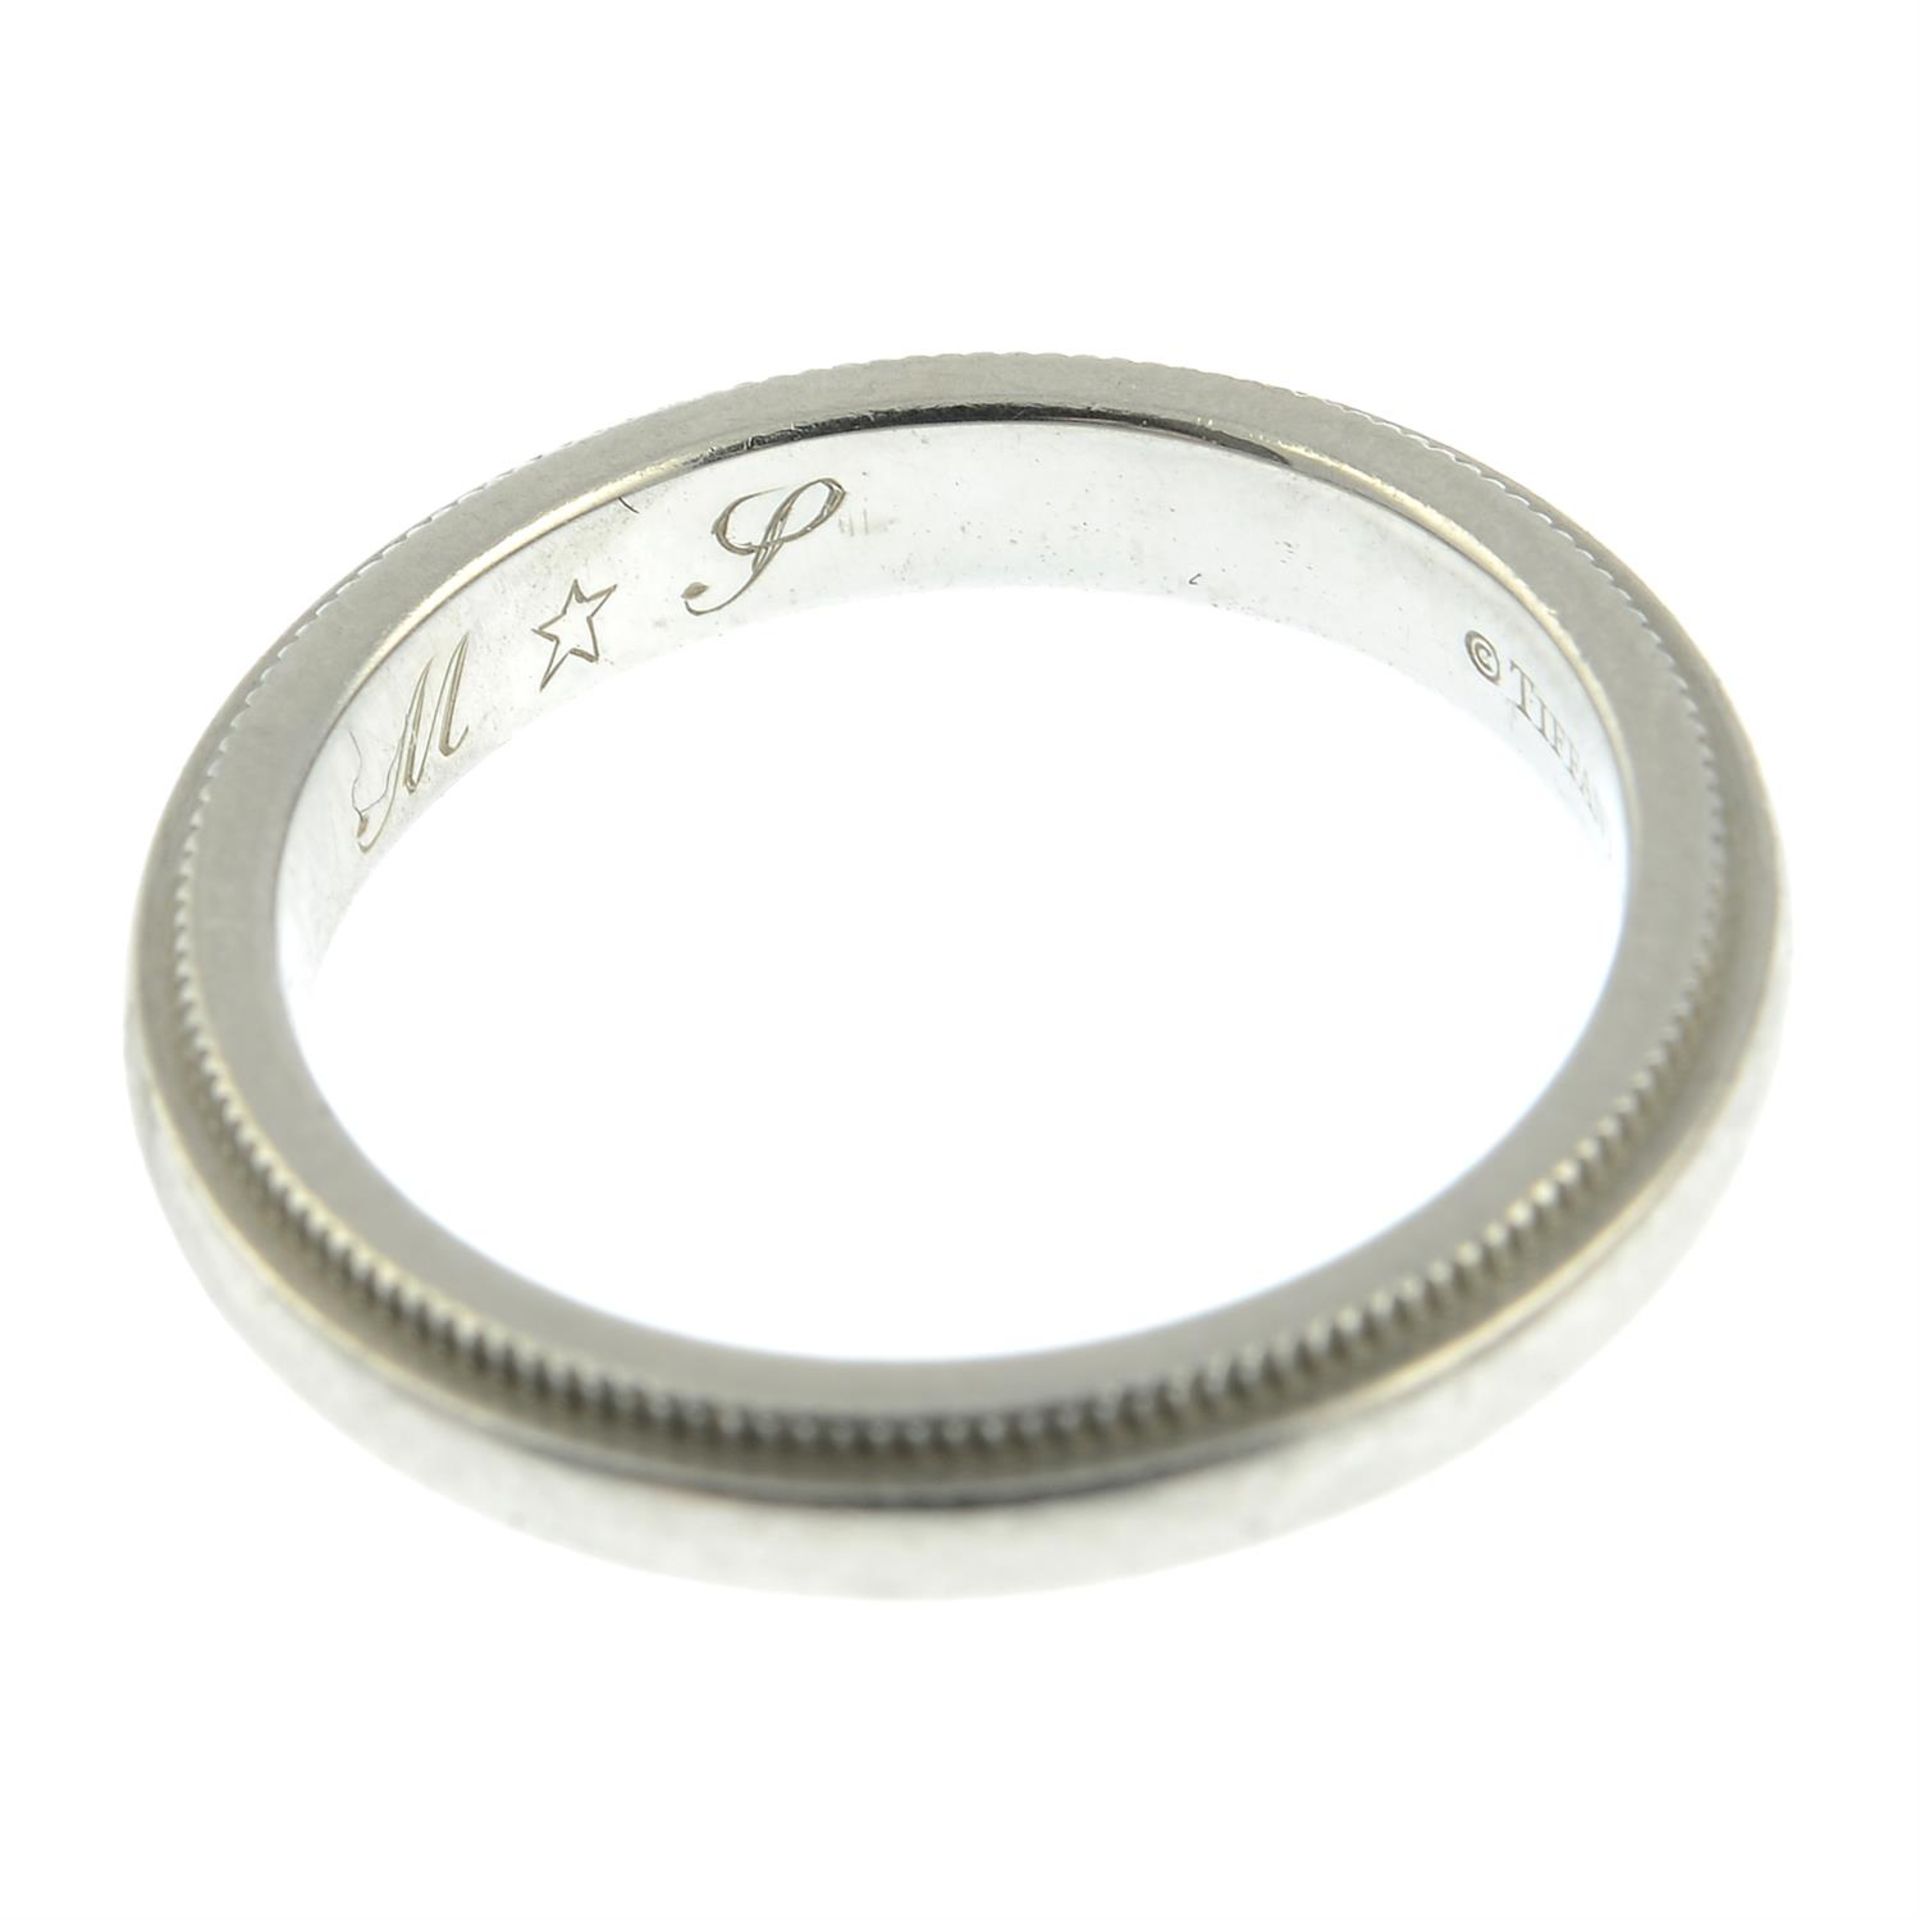 A 'Milgrain' band ring, by Tiffany & Co. - Image 2 of 2